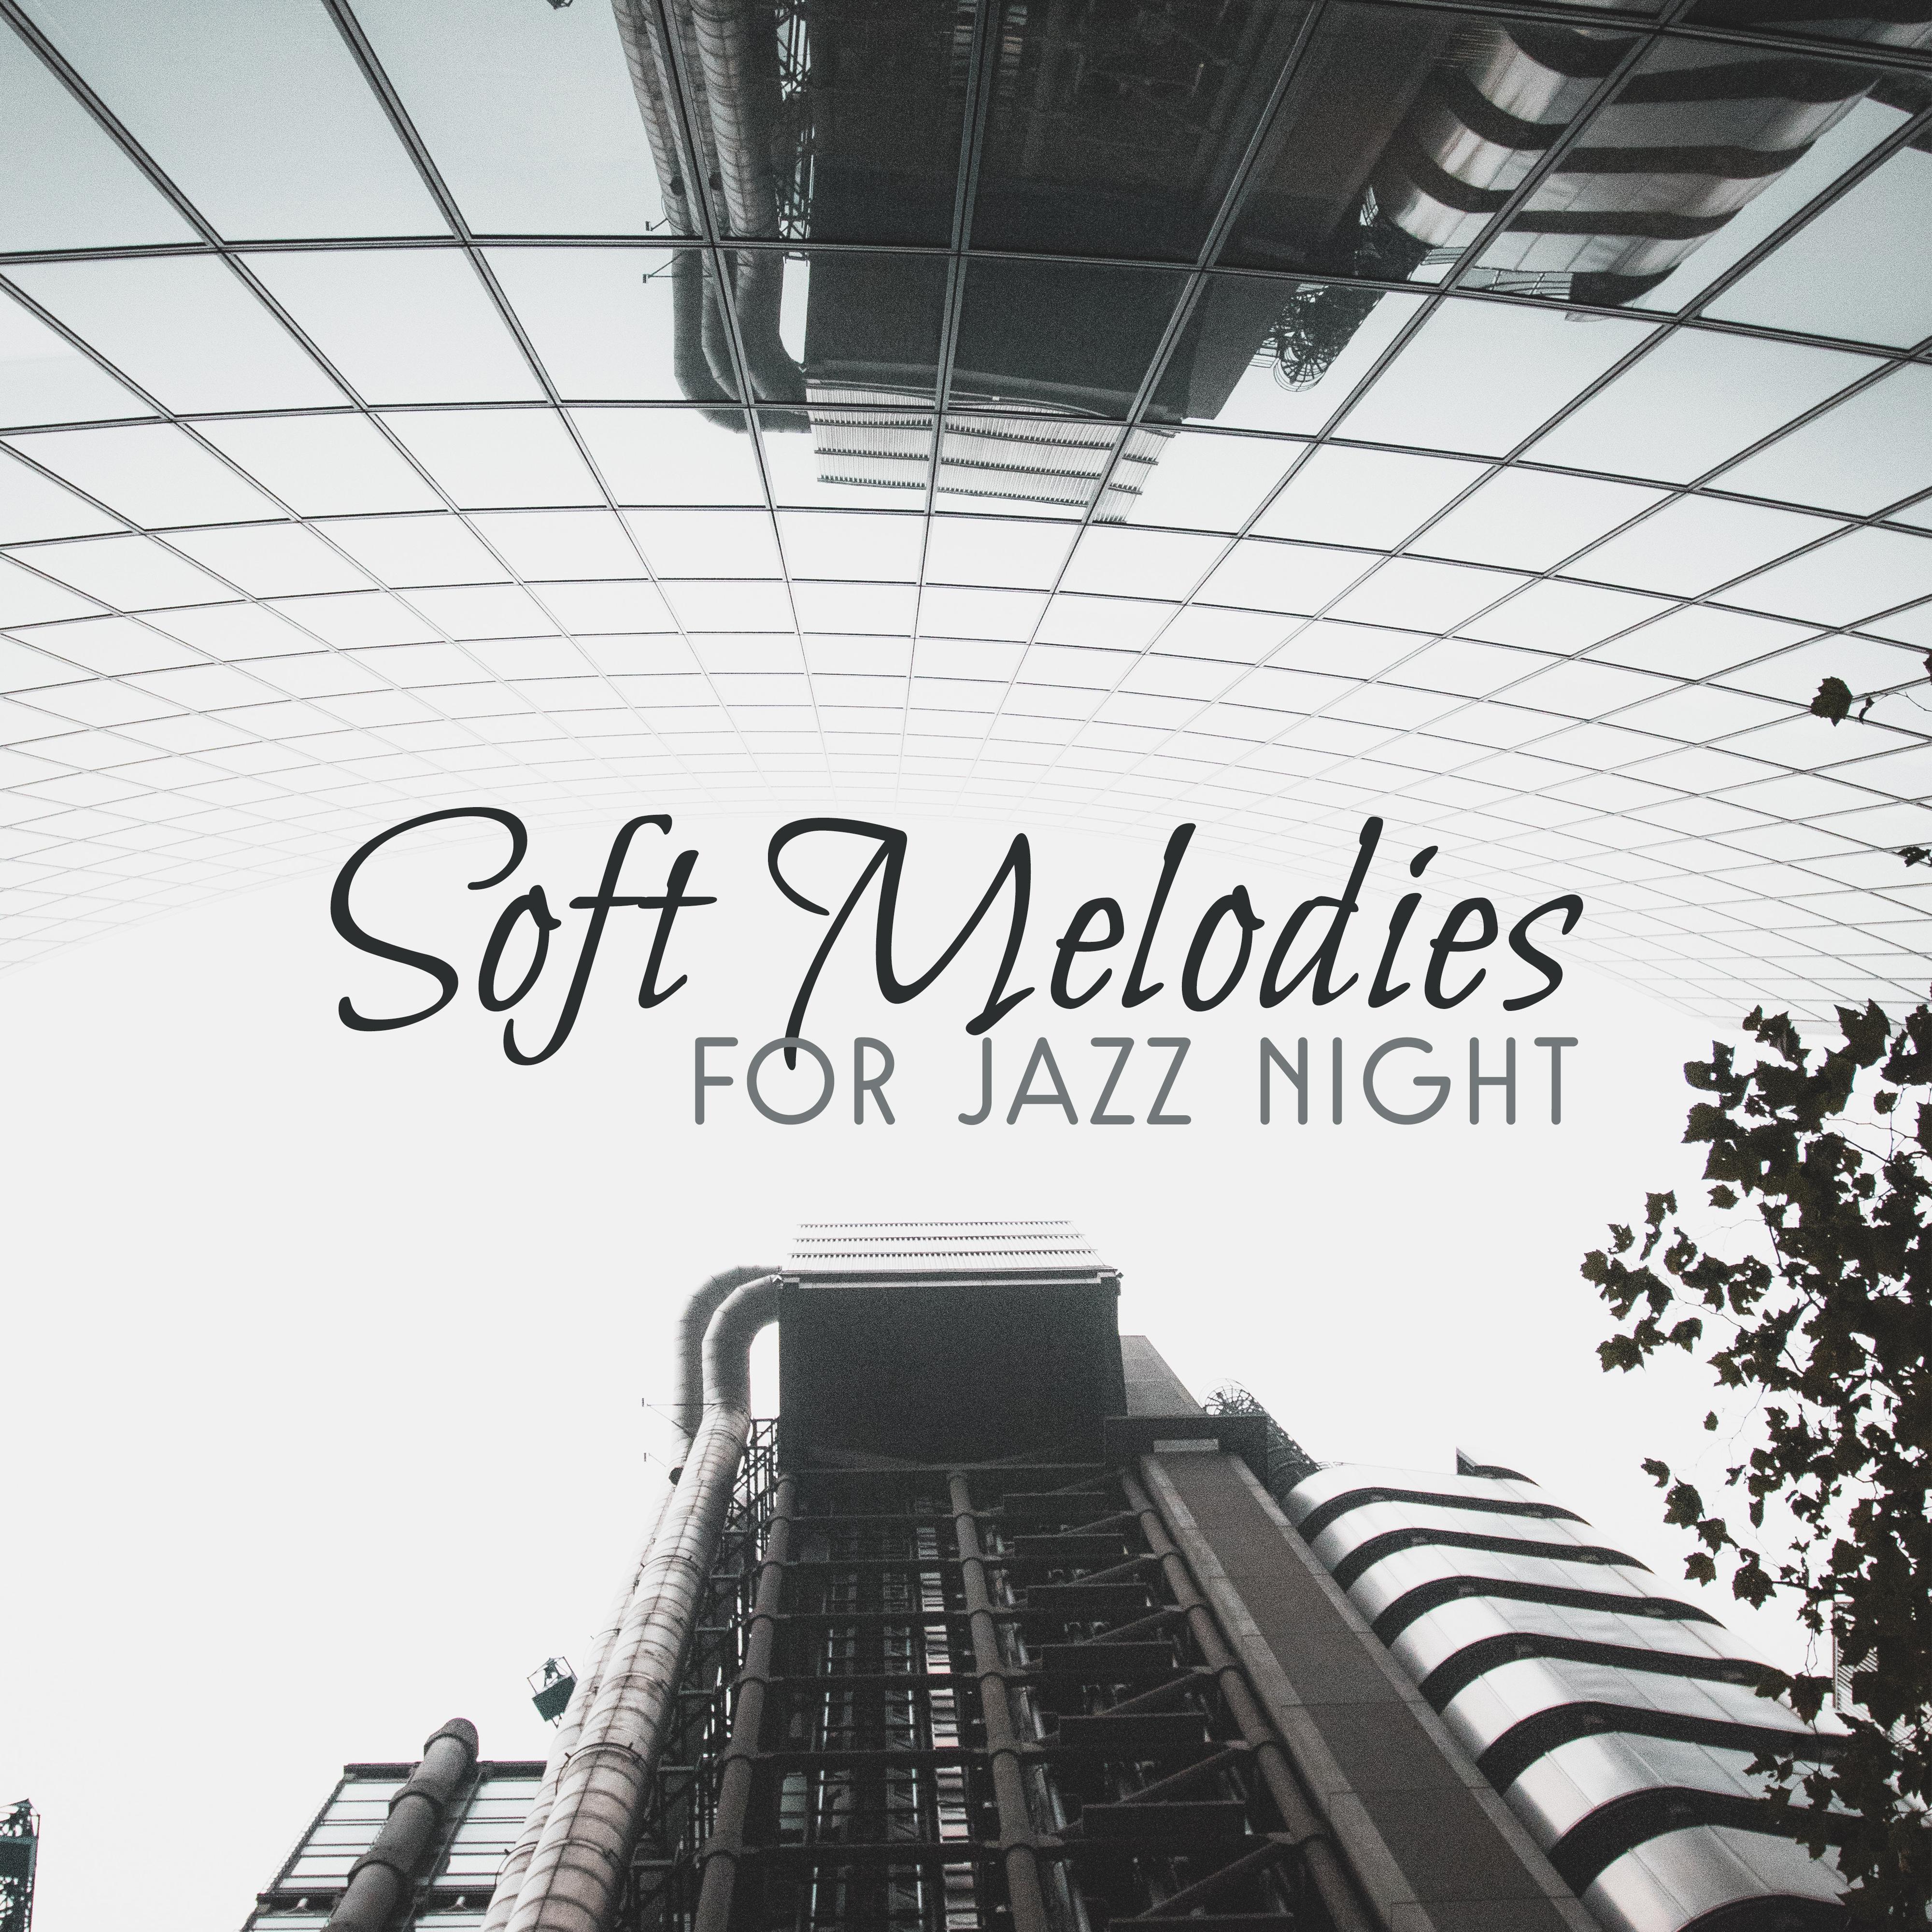 Soft Melodies for Jazz Night